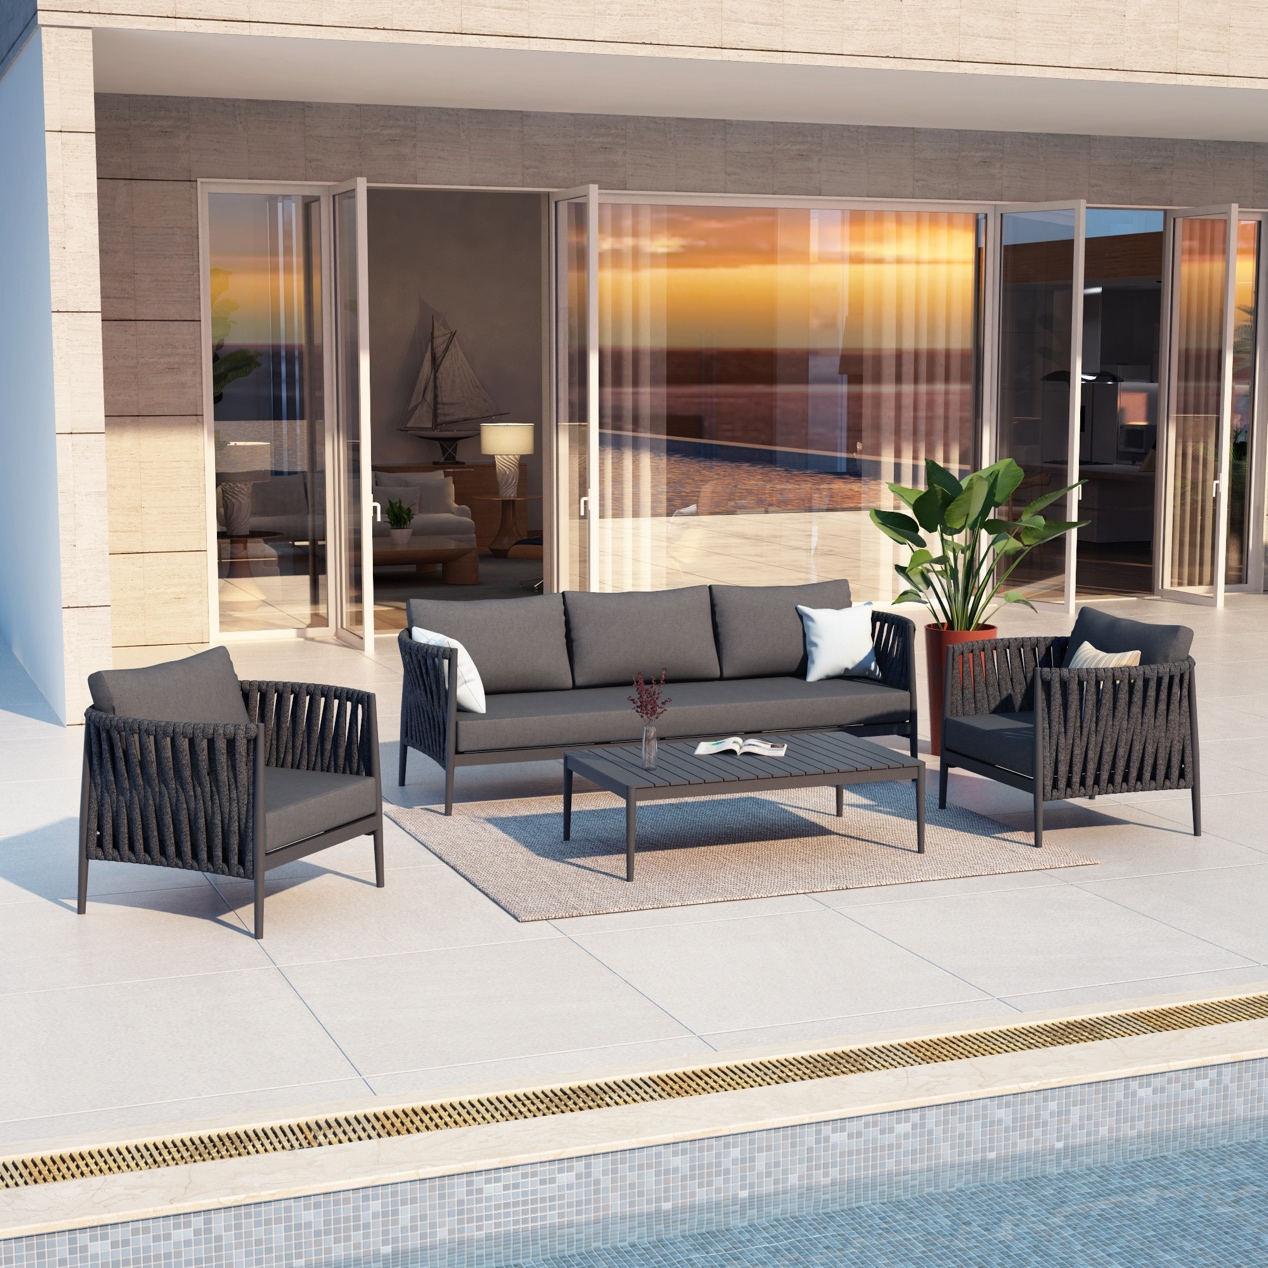 Baeryon's Launches a New Summer Outdoor Wicker Sectional Collection